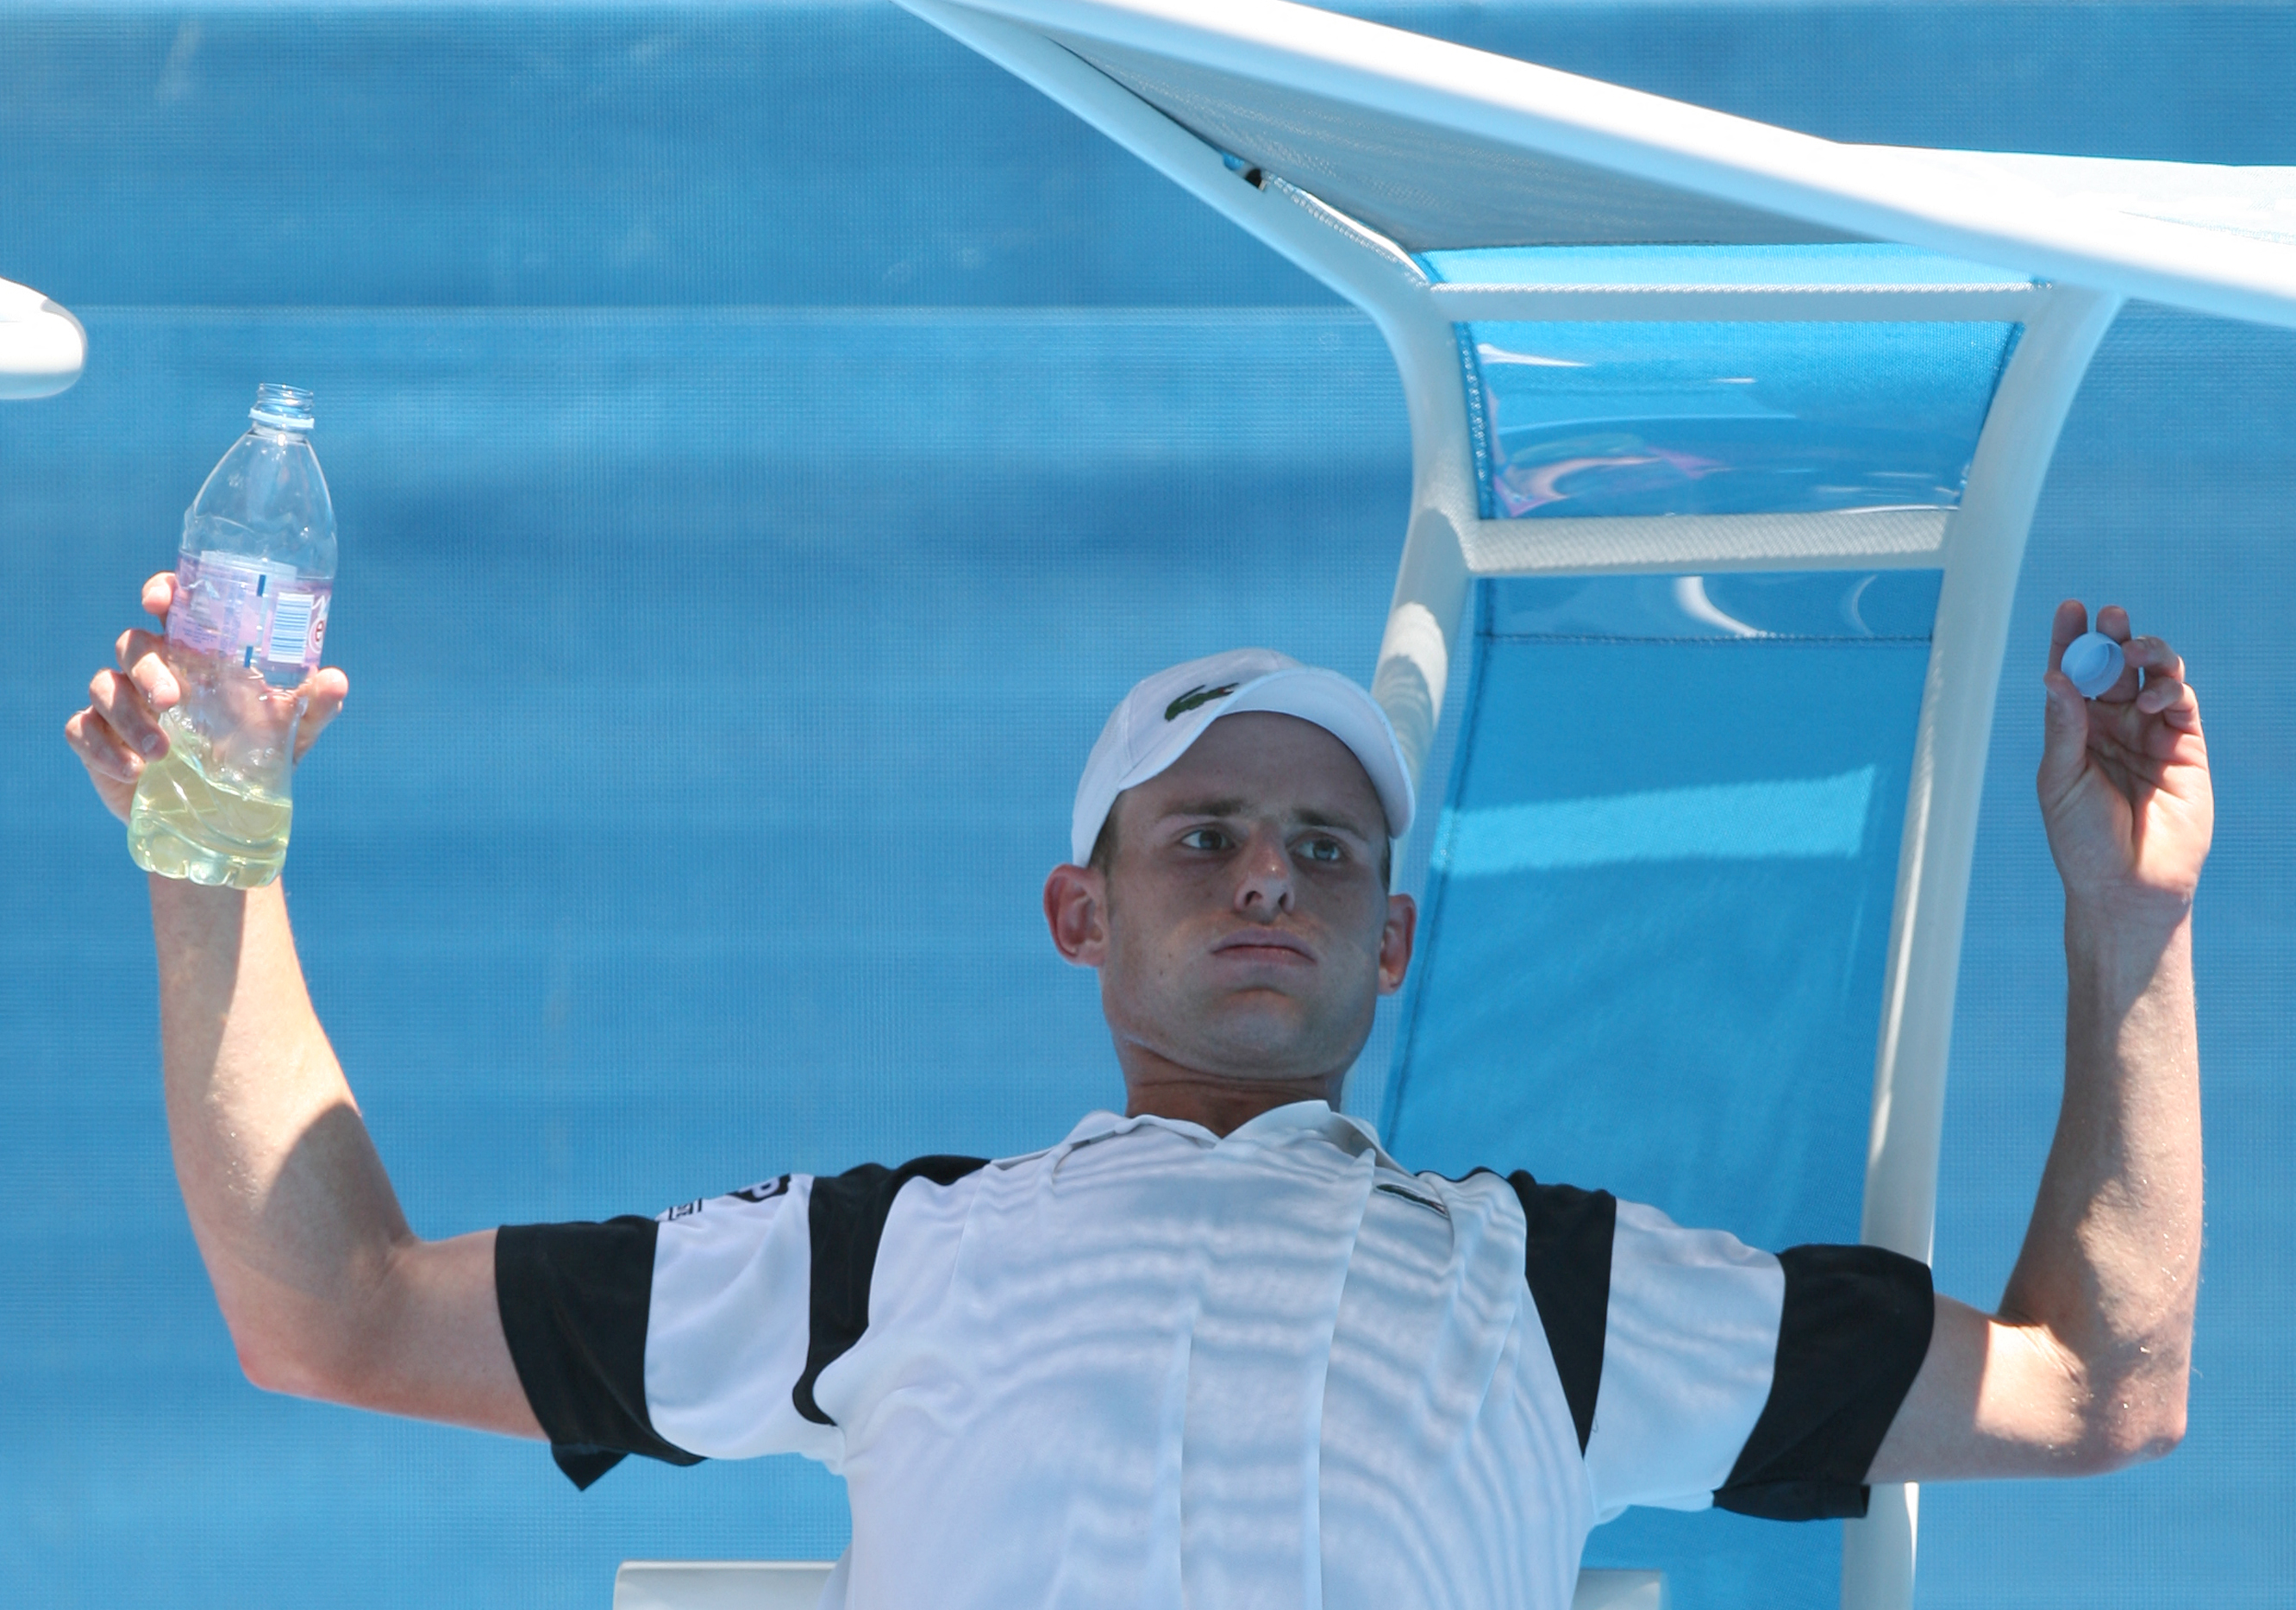 Andy Roddick of the US gestures during a break in his first round mens singles match against Bjorn Rehnquist of Sweden at the Australian Open Tennis tournament in Melbourne on January 19, 2009.   Roddick won 6-0, 6-2. 6-2. . AFP PHOTO/William WEST (Photo by WILLIAM WEST / AFP)